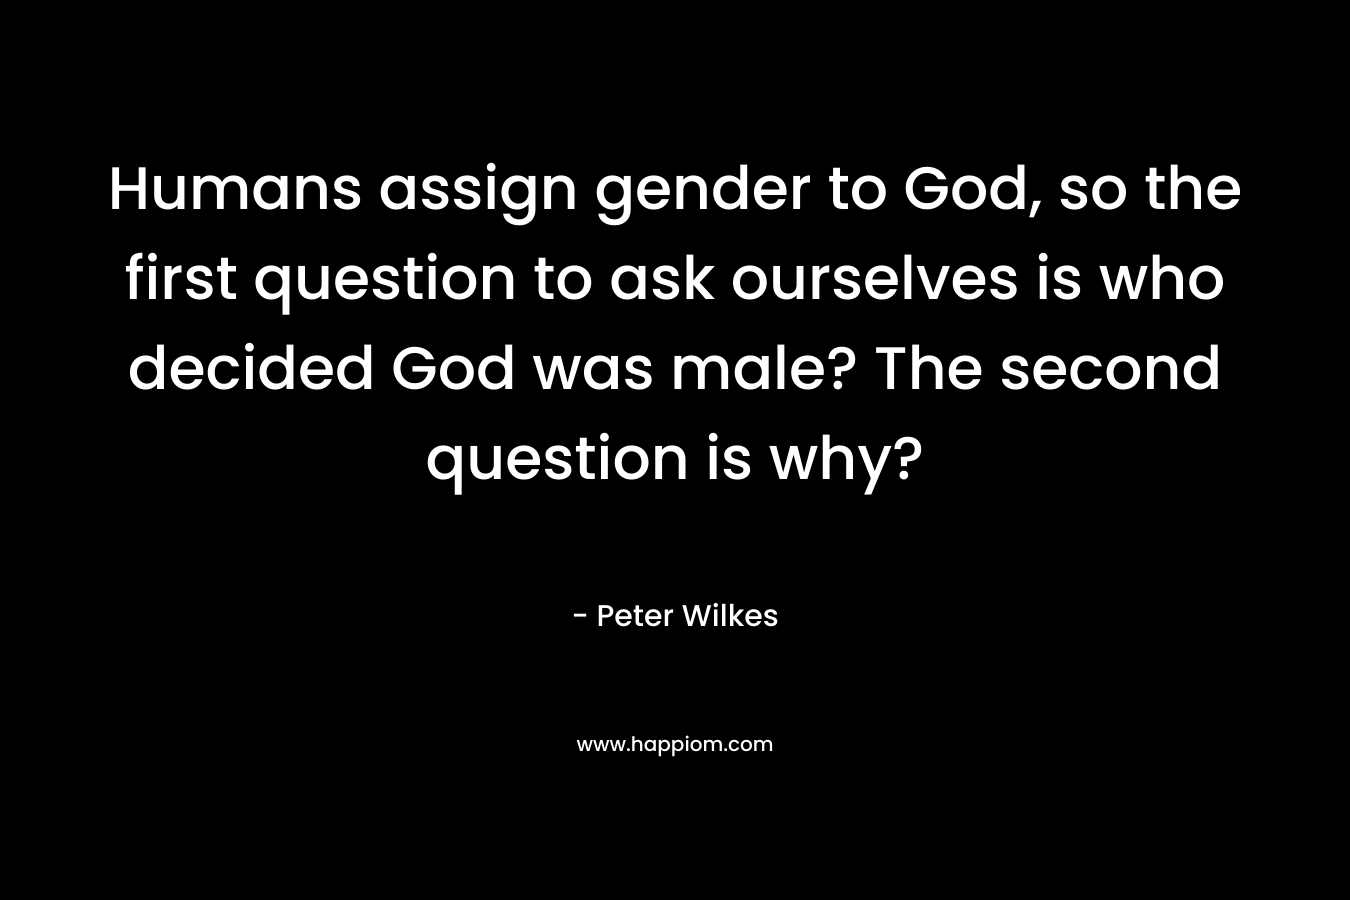 Humans assign gender to God, so the first question to ask ourselves is who decided God was male? The second question is why?